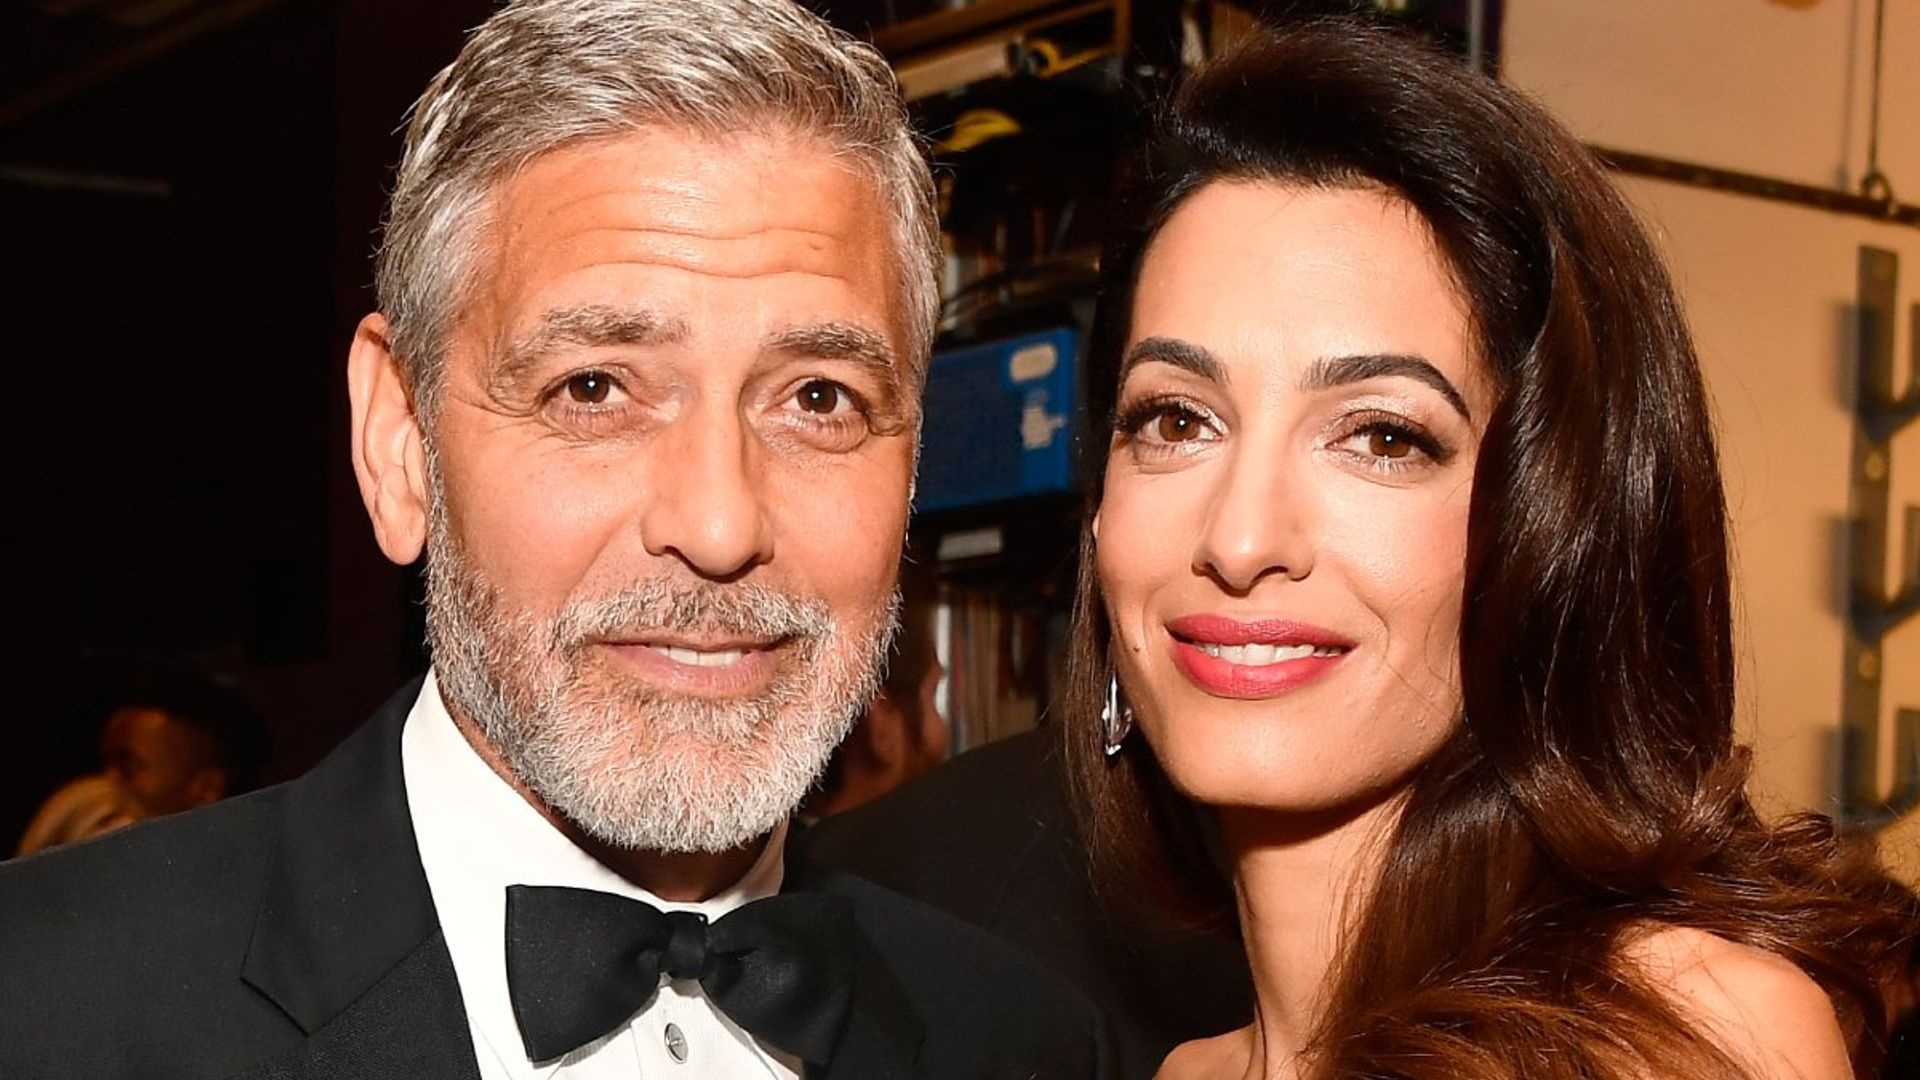 George Clooney reveals wife Amal binged his hit show ER during maternity leave